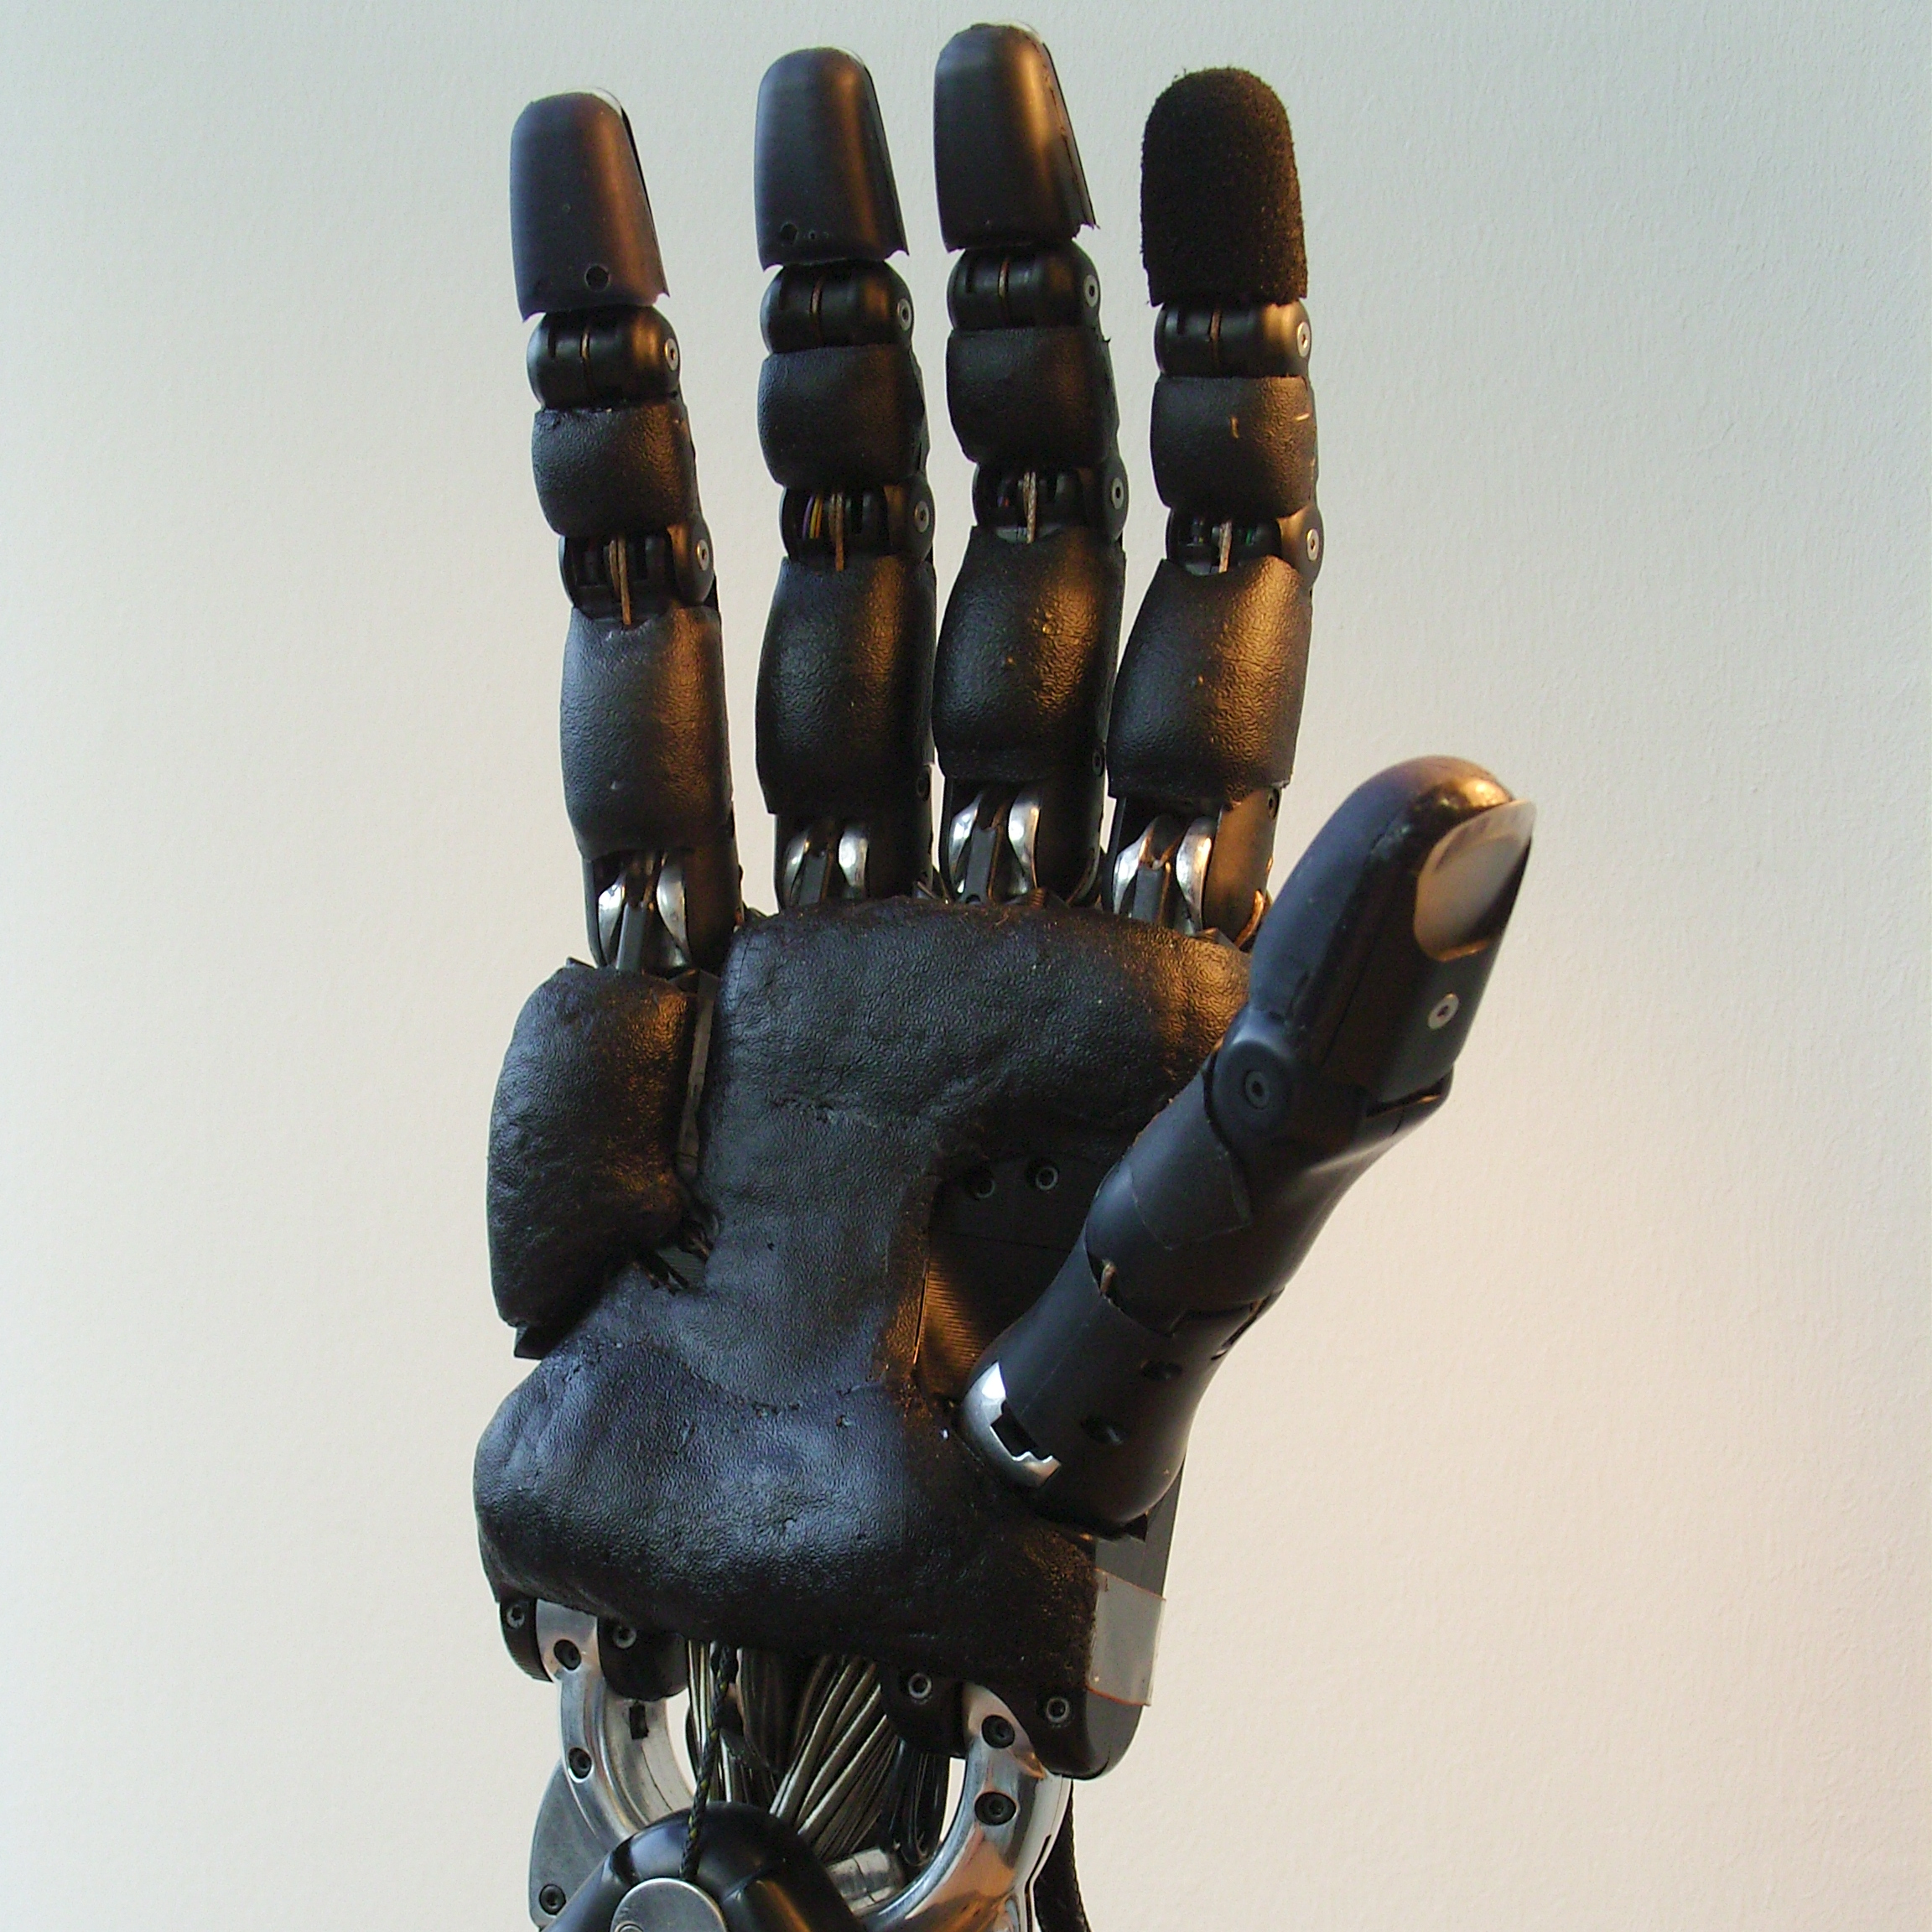 Sensorized Shadow Robot Hand Palm, proximal and middle phalanges are equipped with elastic tactile sensors, Covered with fine structured silicone rubber skin.